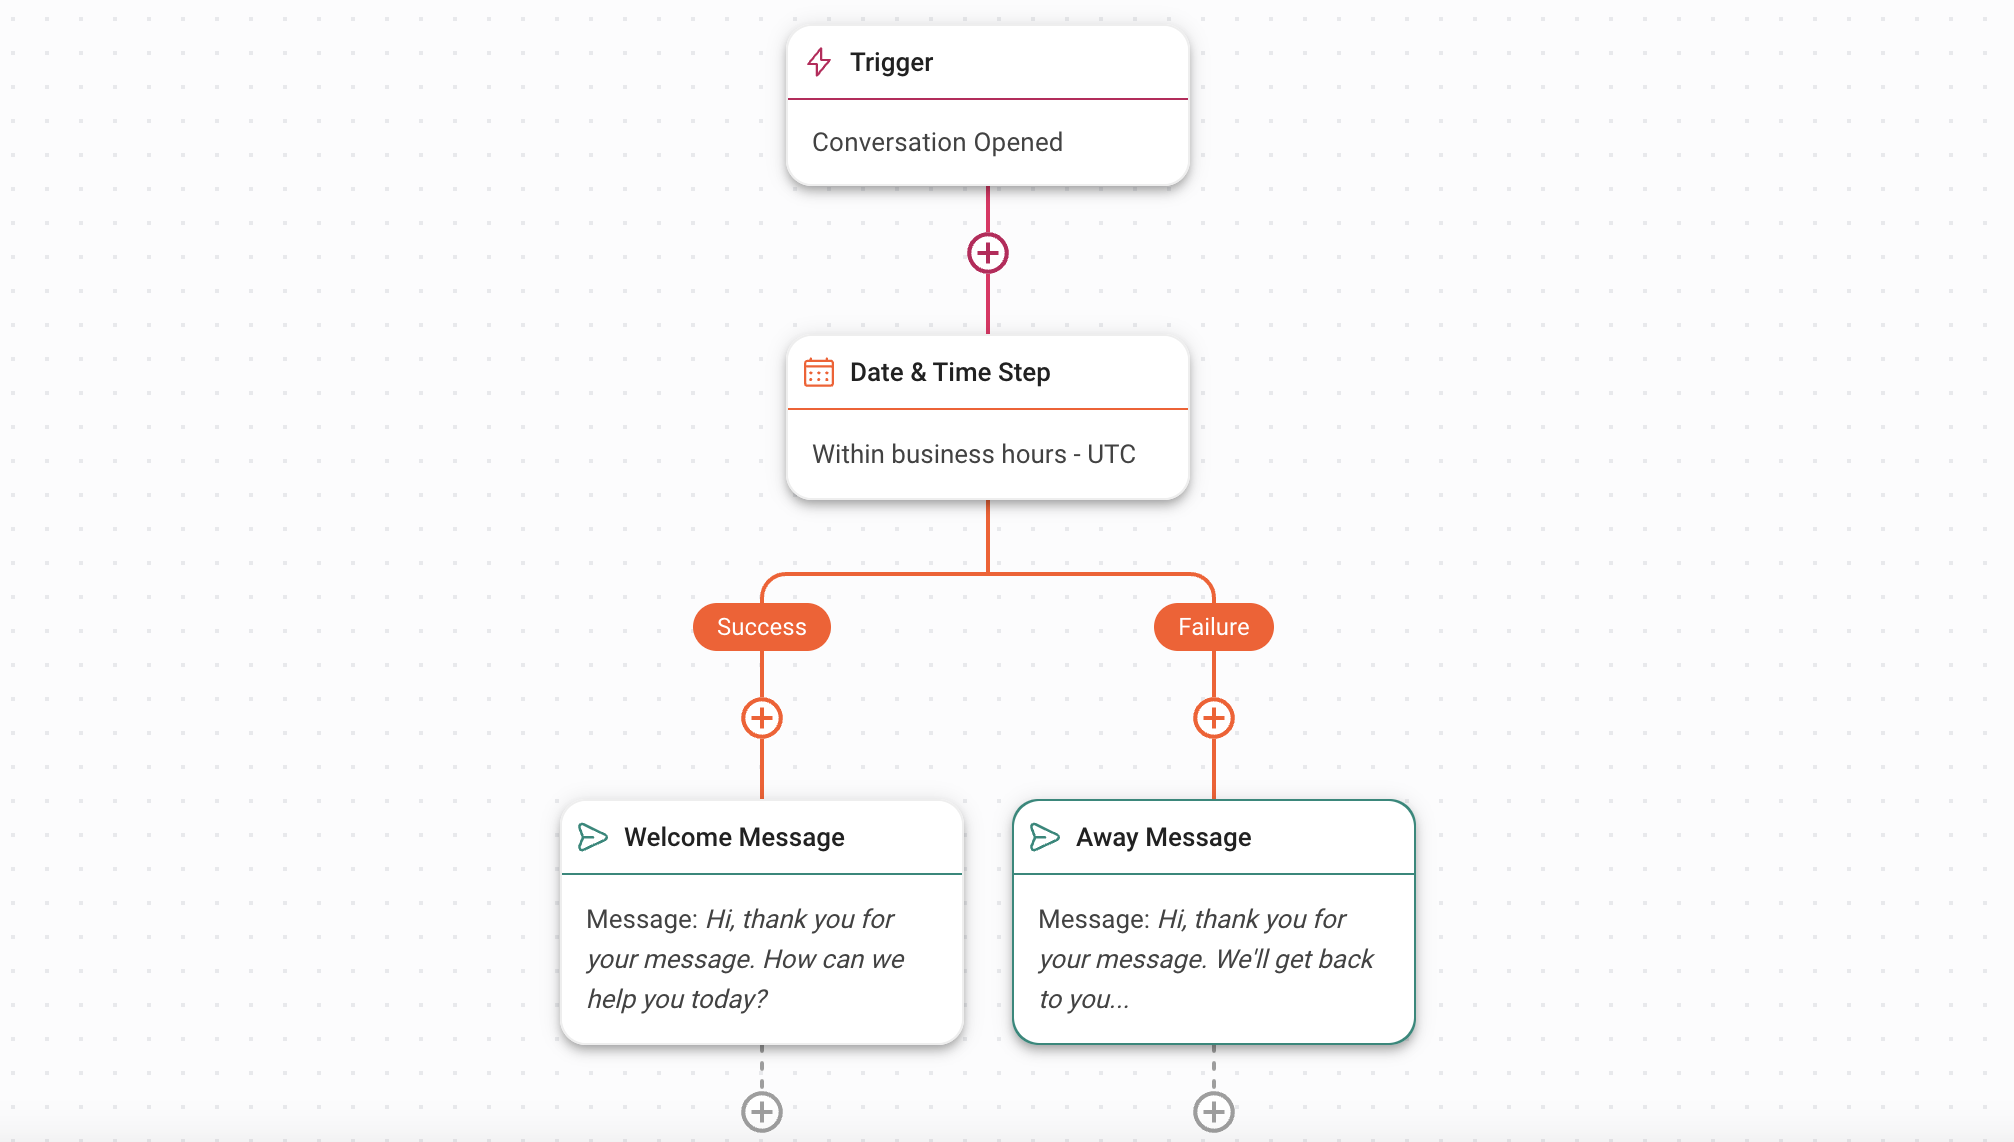 screenshot of workflow to send a welcome or away message based on business hours